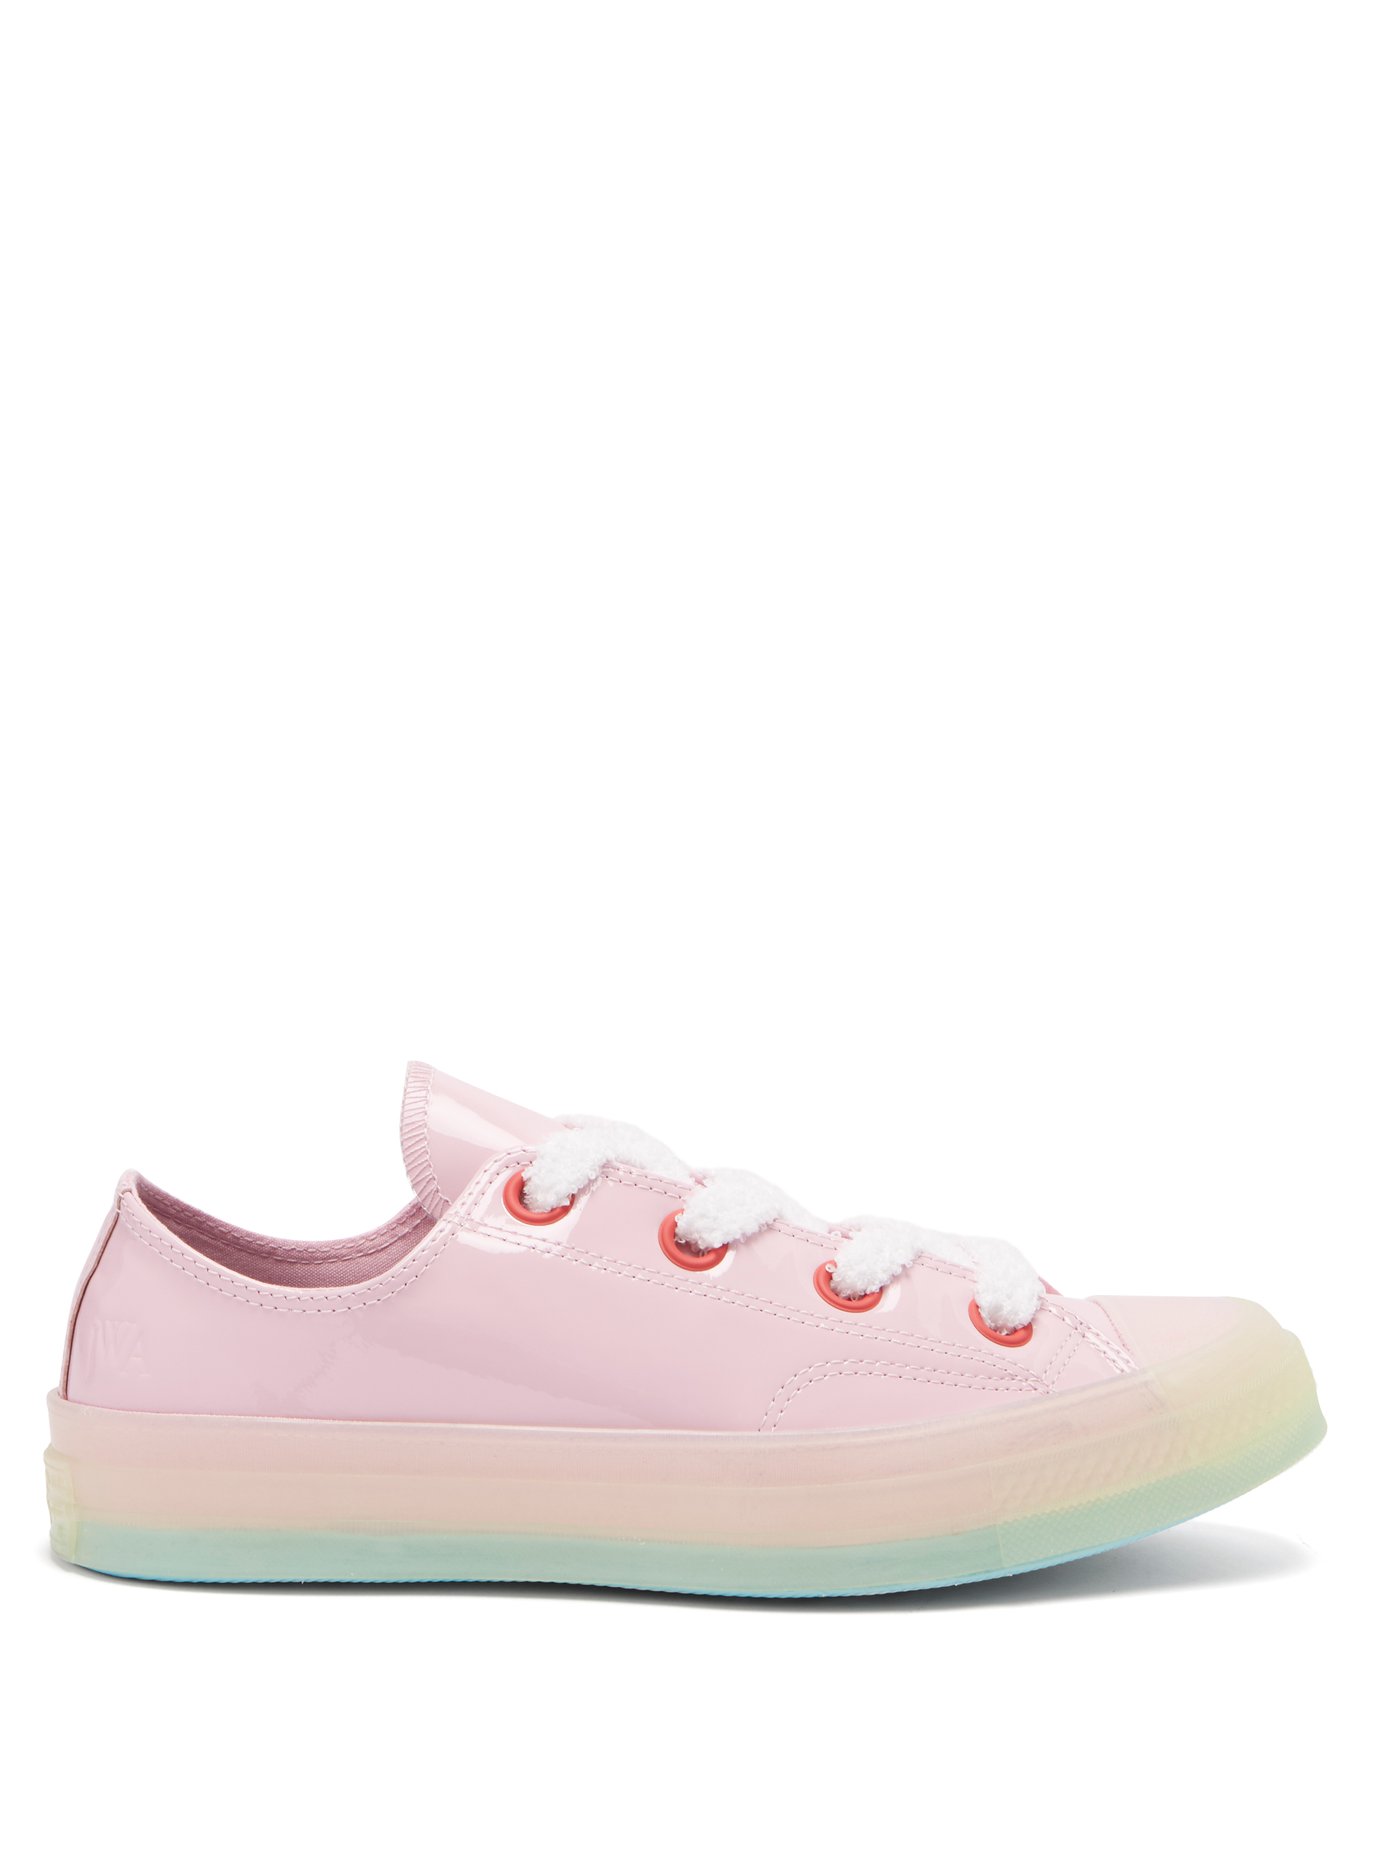 pink patent leather converse